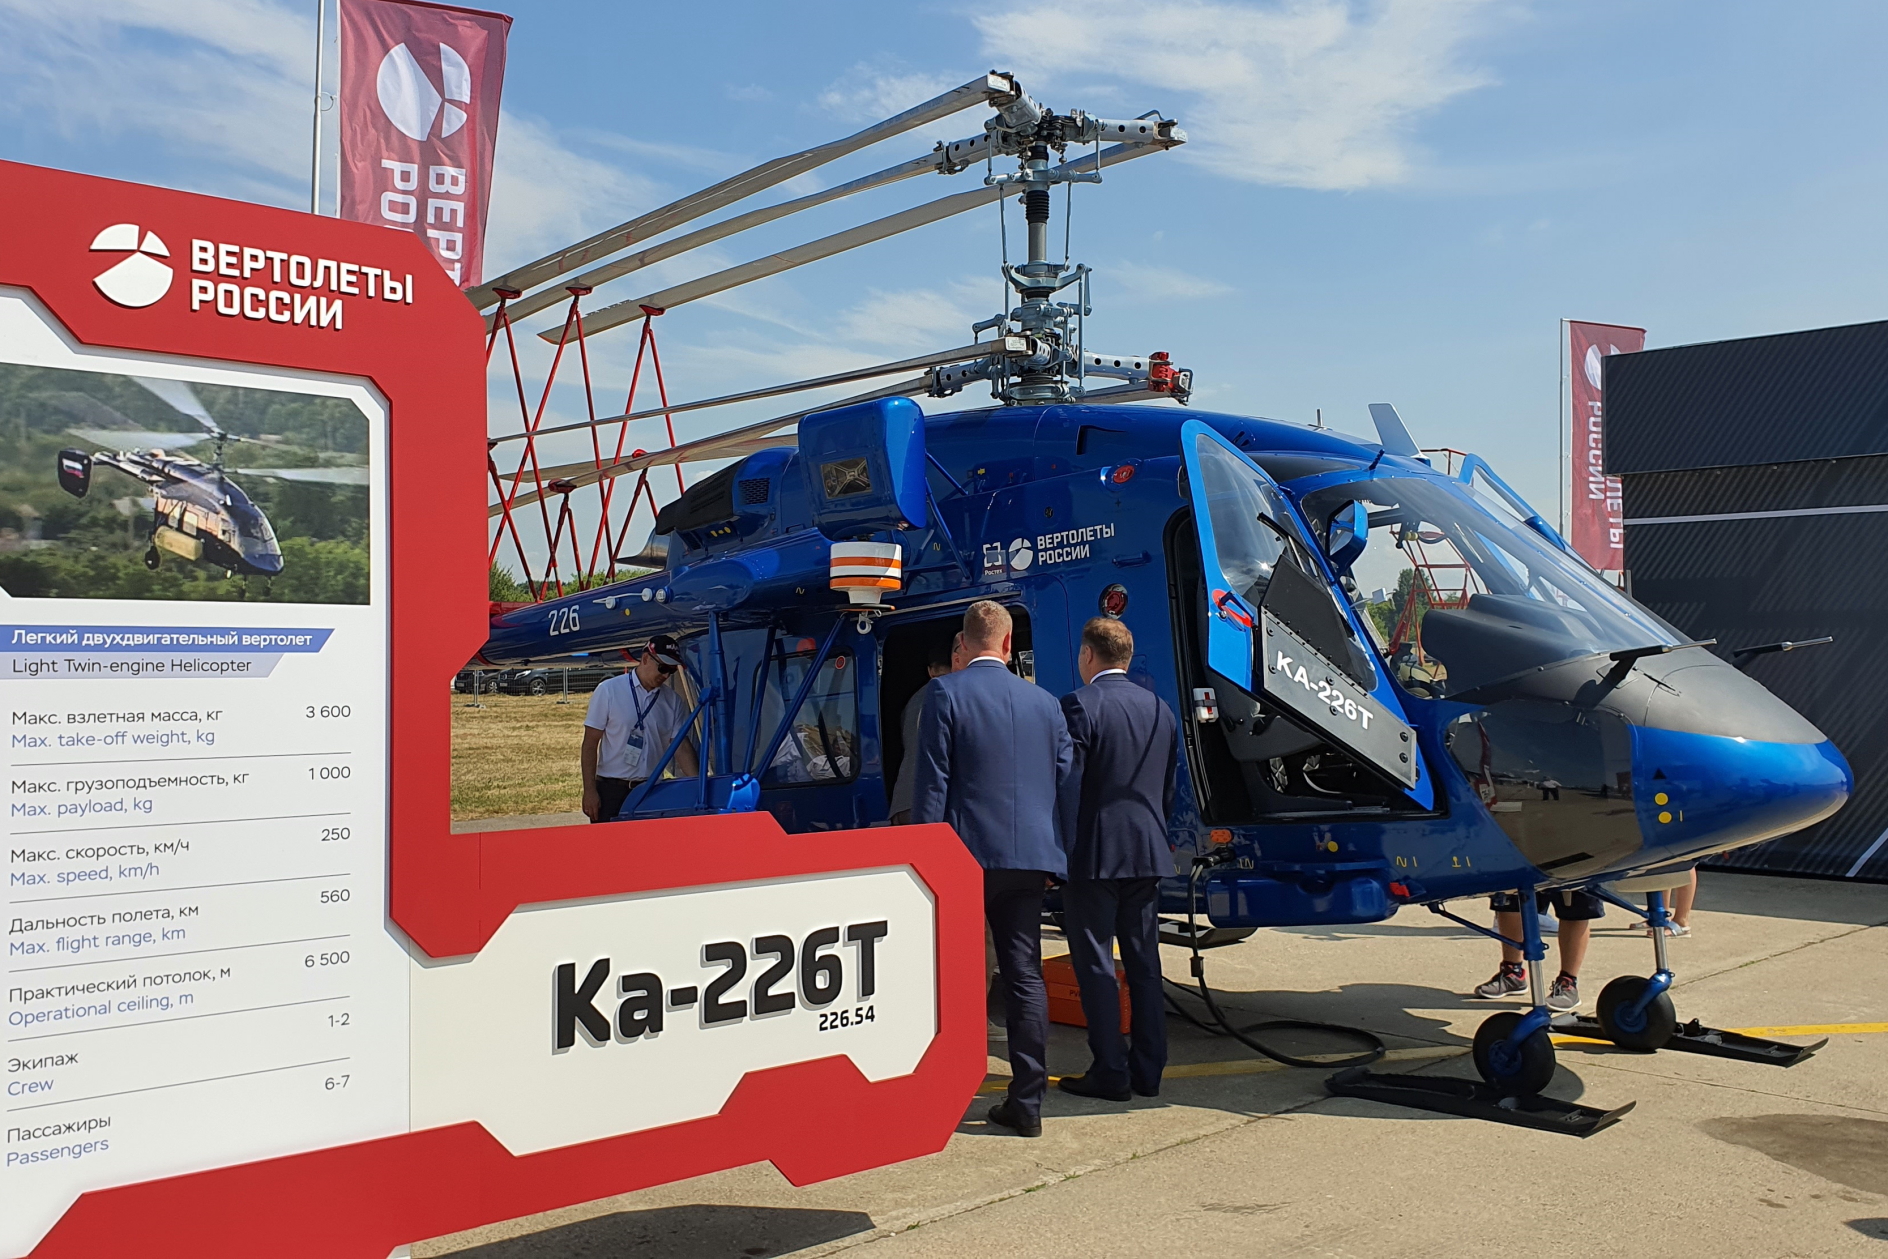 Russian Helicopters is showcasing the Ka-226T Climber helicopter at the MAKS-2021 International Aviation and Space Salon. Click to enlarge.